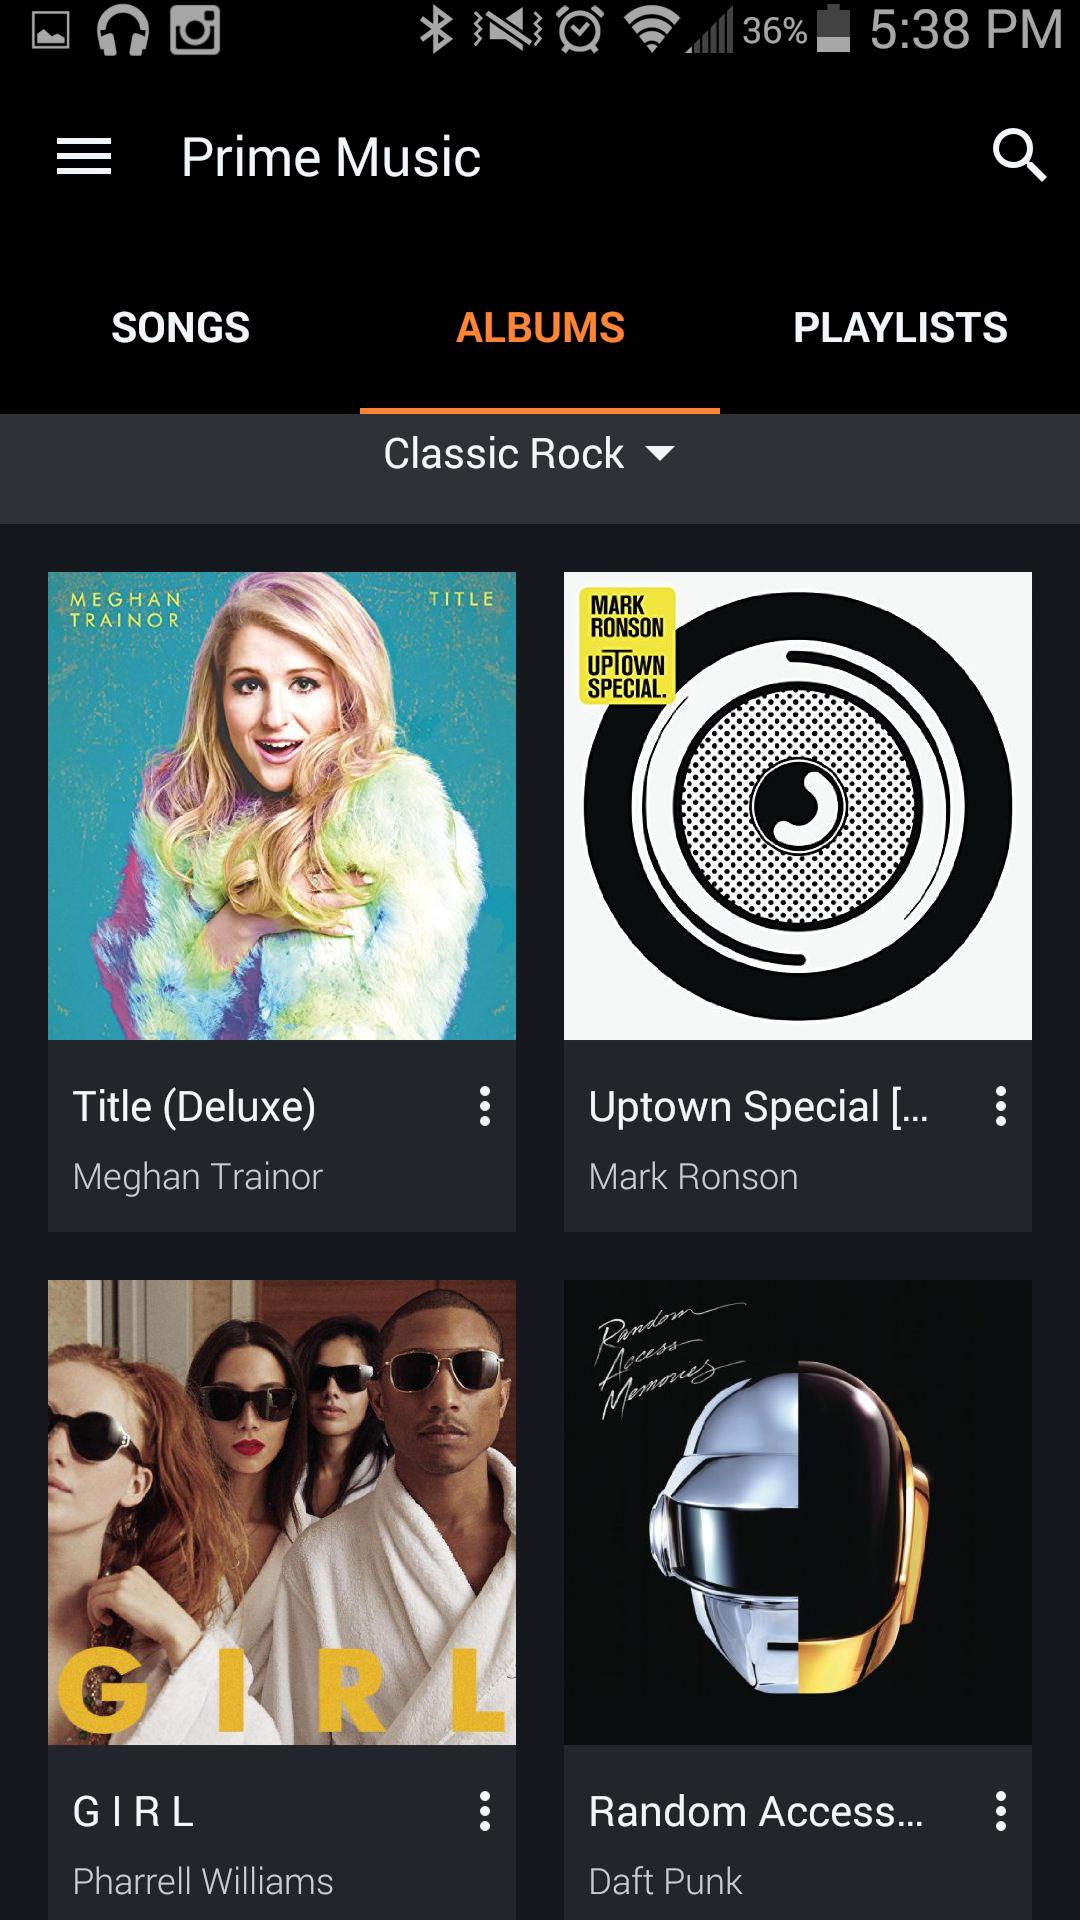 infuriating website - N S B 36% Prime Music Songs Albums Playlists Classic Rock Title Meghan Trainor Mark Ronson Uptown Special. Title Deluxe Meghan Trainor Uptown Special ... Mark Ronson Ceo Girl Random Access.... Daft Punk Pharrell Williams